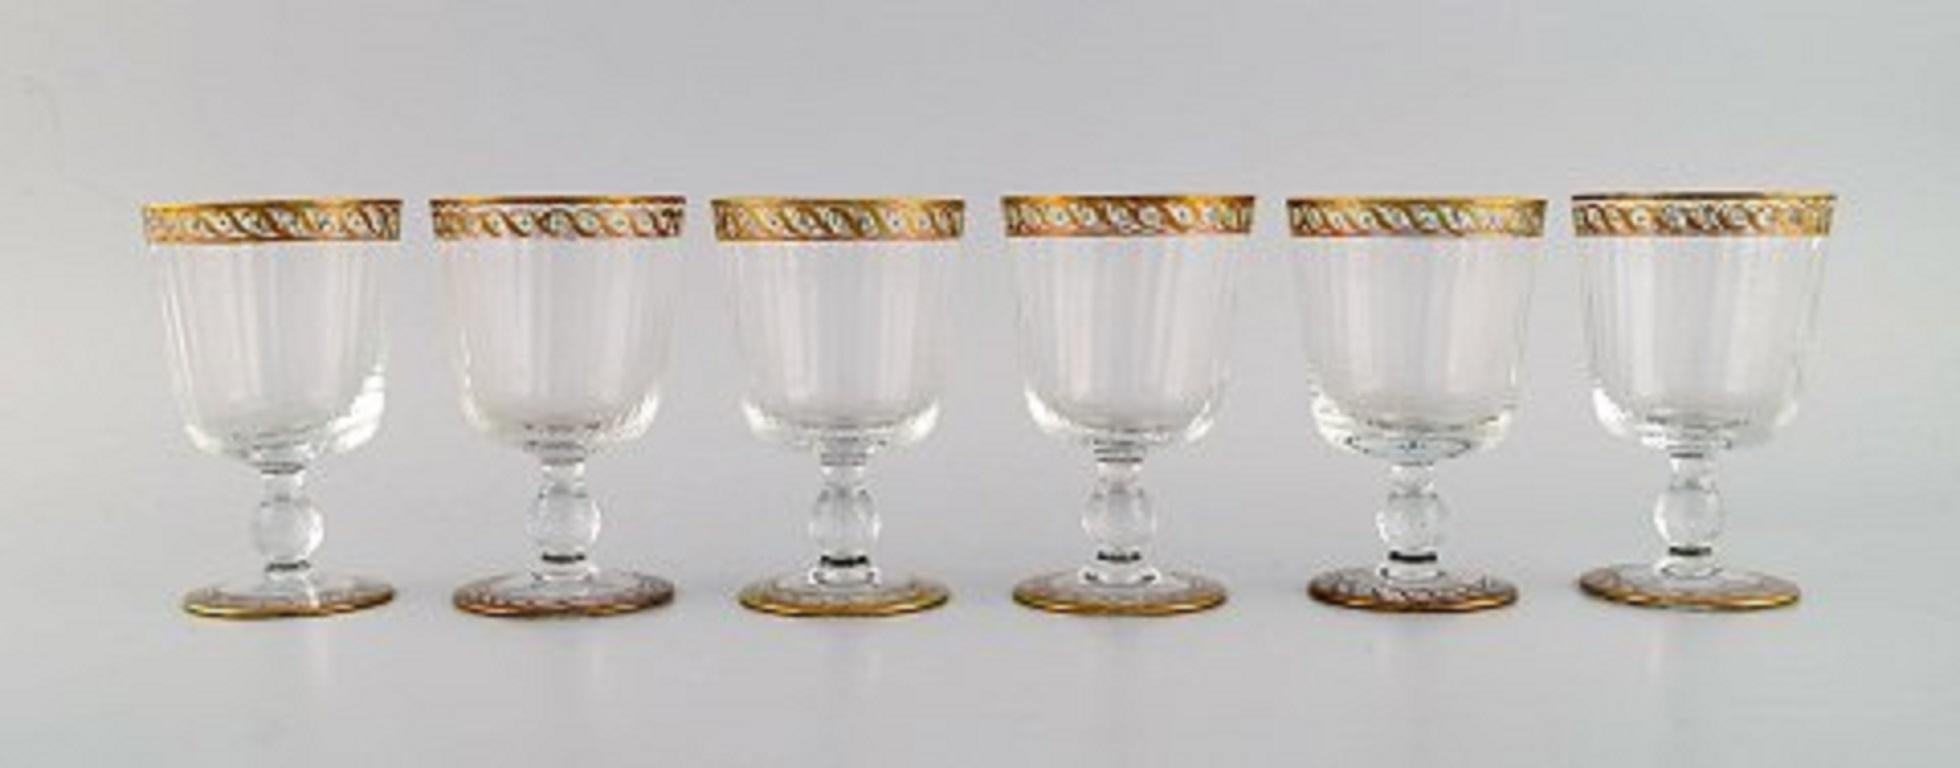 Nason & Moretti, murano. Six white wine glasses in mouth-blown art glass with hand-painted turquoise and gold decoration. 1930s.
Measures: 10.7 x 6.7 cm.
In excellent condition.